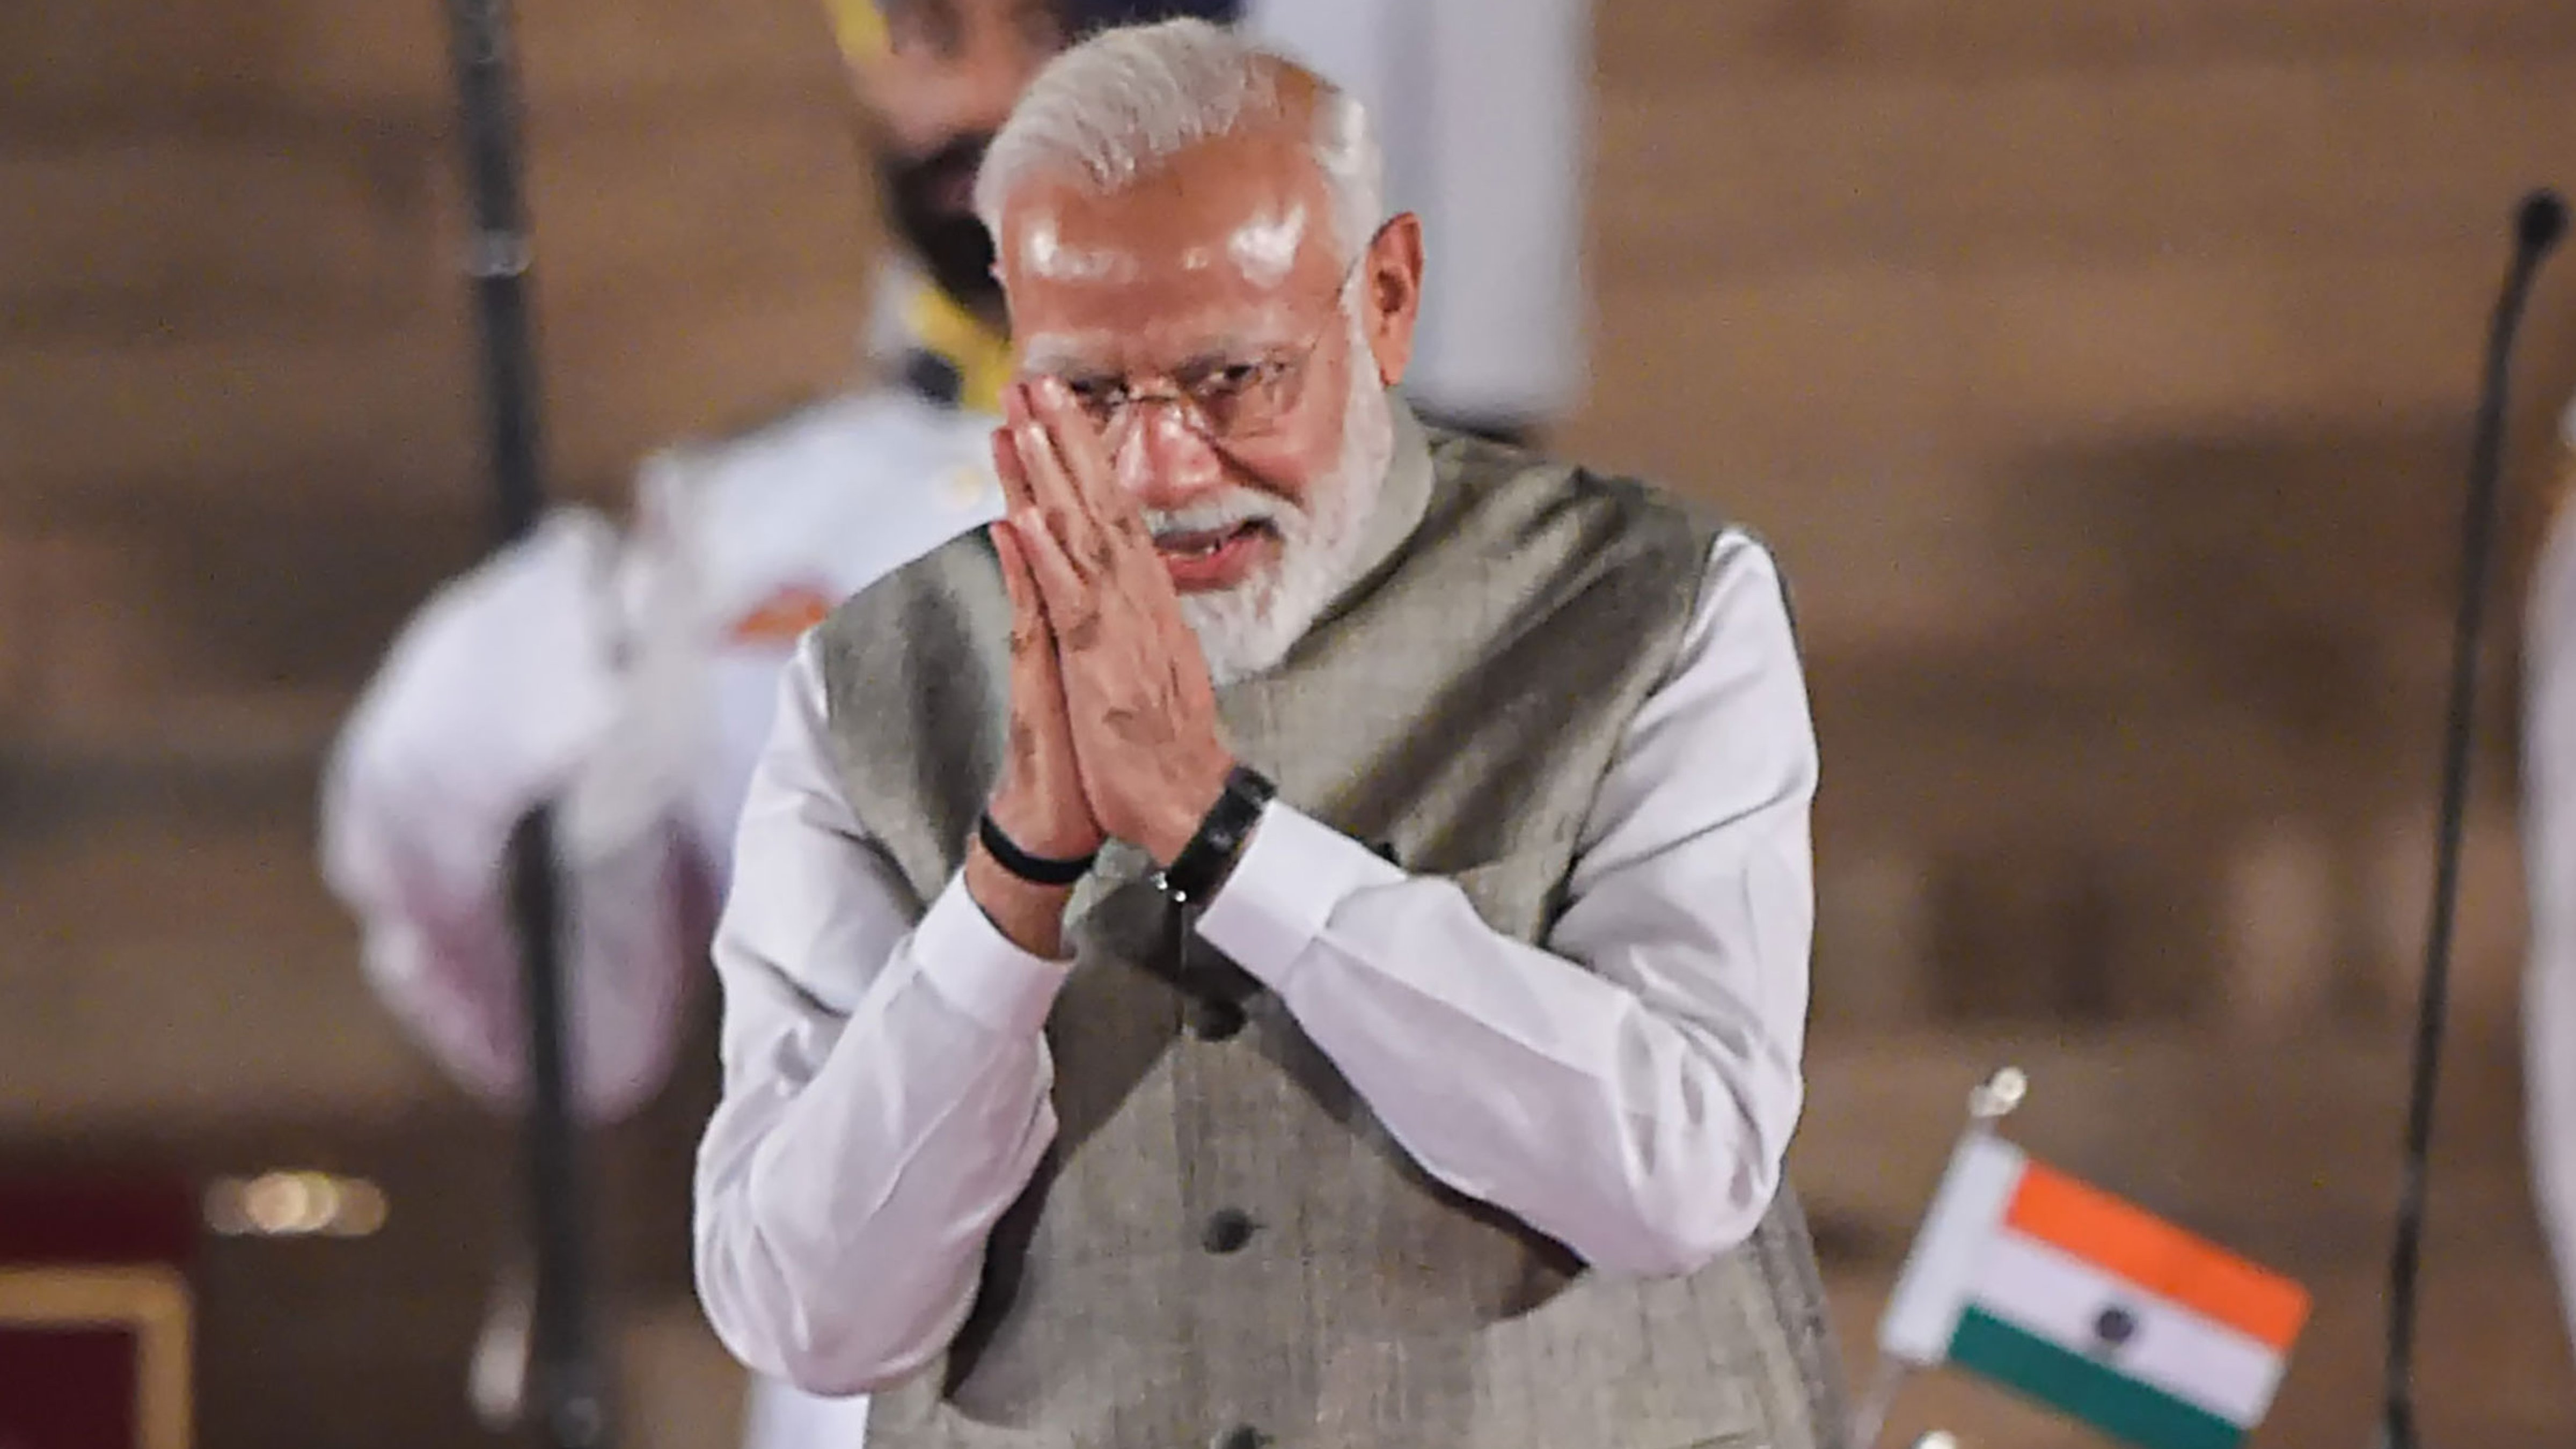 Modi greets guests at his swearing-in on May 30.